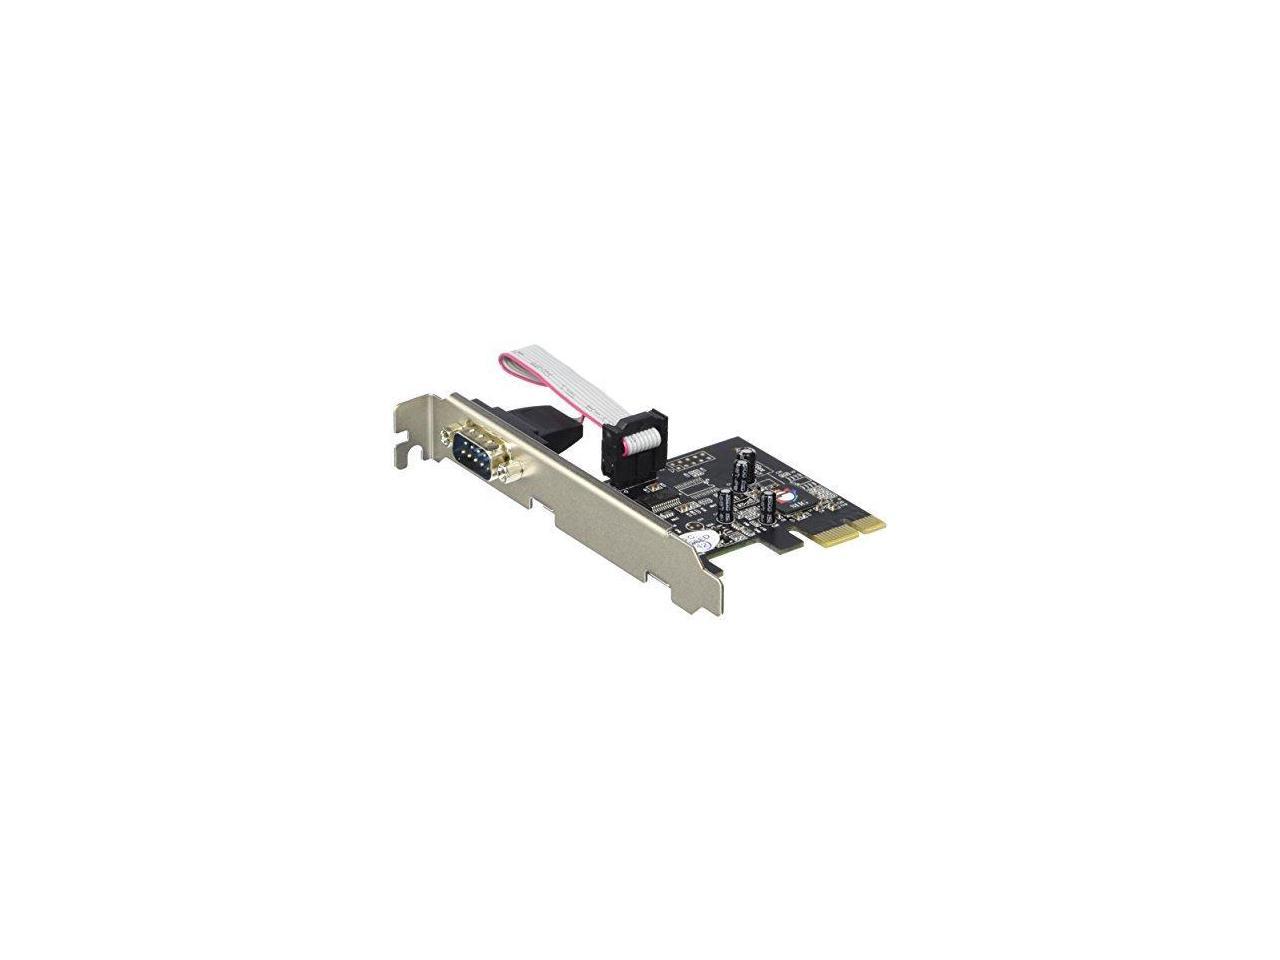 SIIG DP 1-Port RS232 Serial PCIe with 16950 UART serial adapter JJ-E01111-S1 